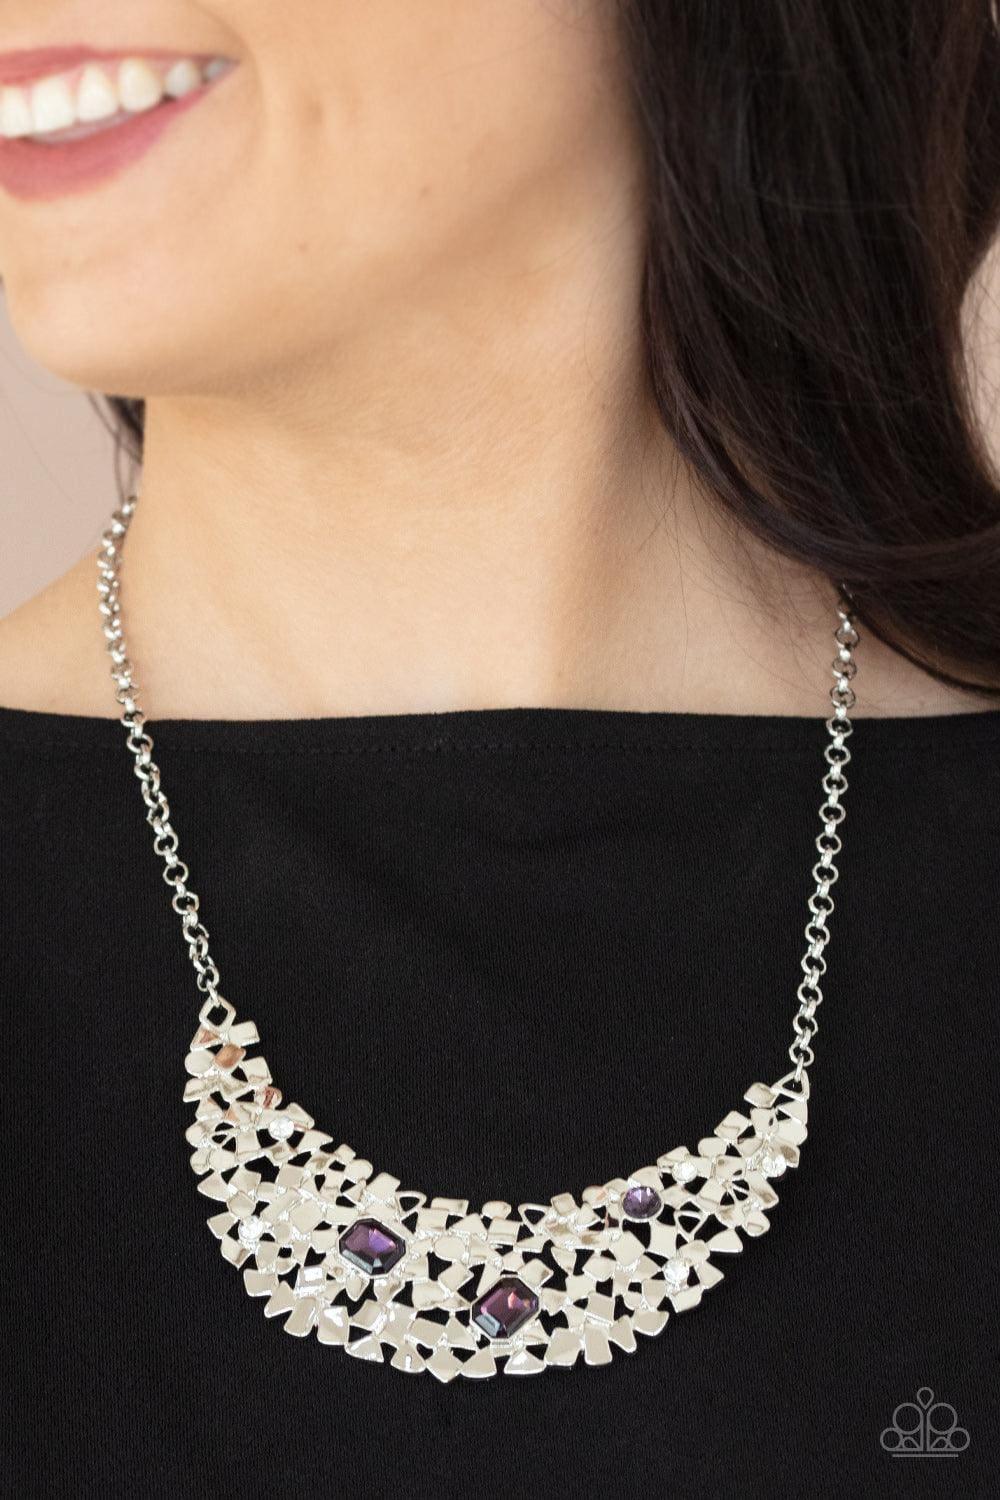 Paparazzi Accessories - Fabulously Fragmented - Purple Necklace - Bling by JessieK